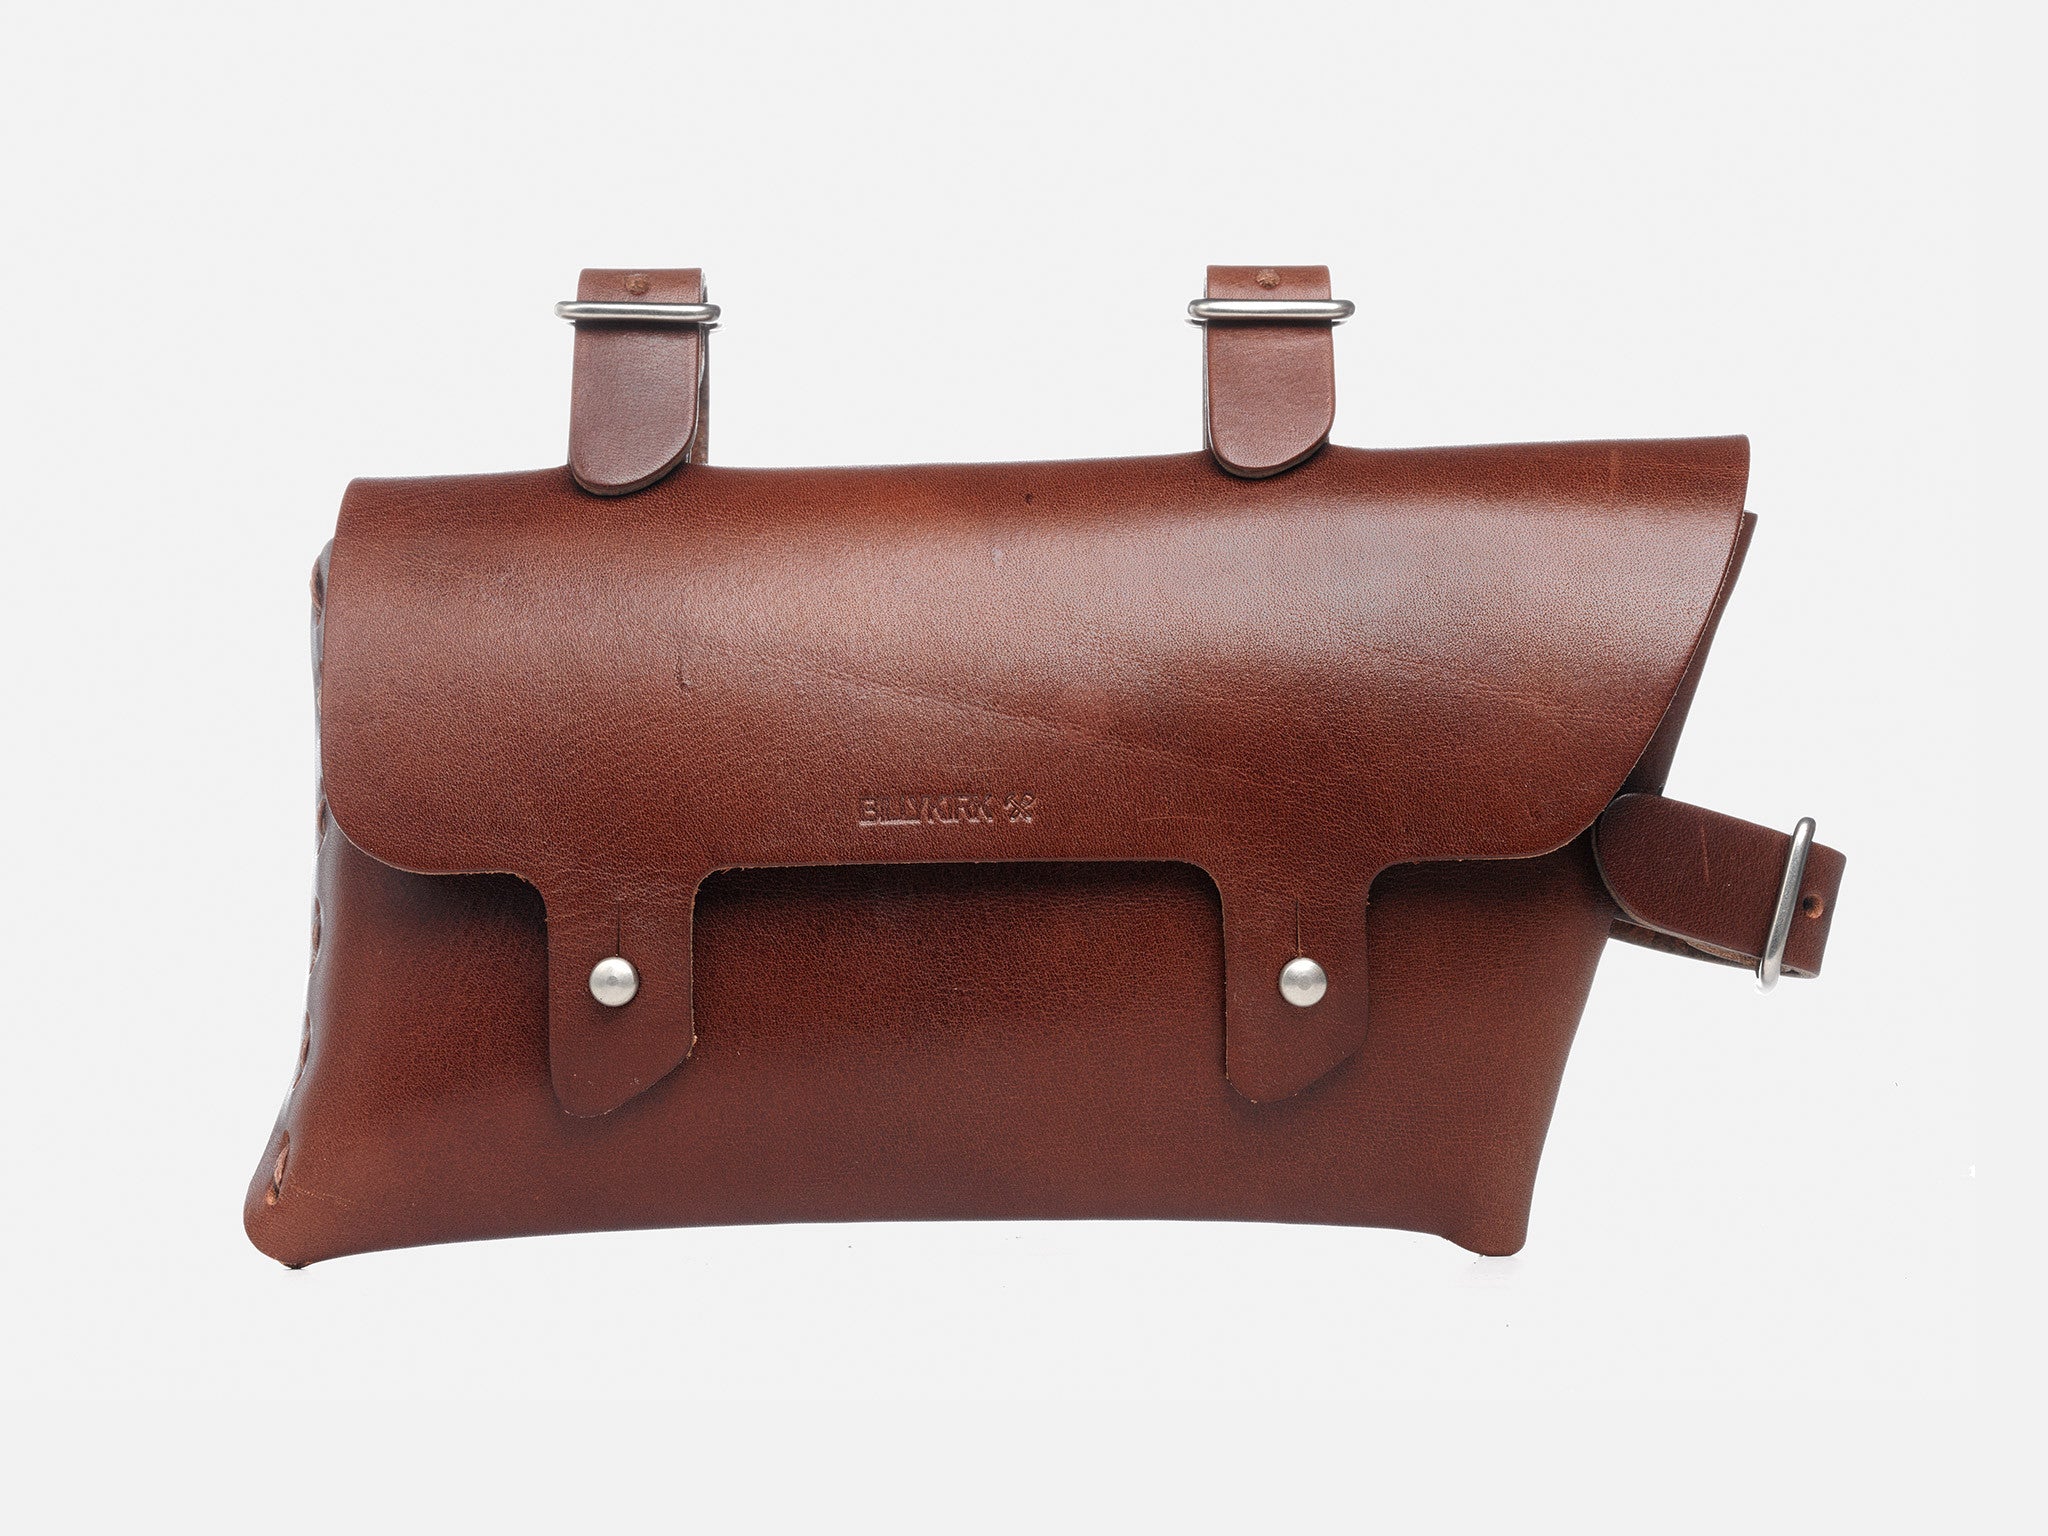 Amazon.com: Haokaini Bicycle Leather Bag Handcrafted Leather Bike Bag  Vintage Motorcycle Saddle Pouch Waterproof Retro Bicycle Front Bag Retro  Style Cycling Accessory : Sports & Outdoors